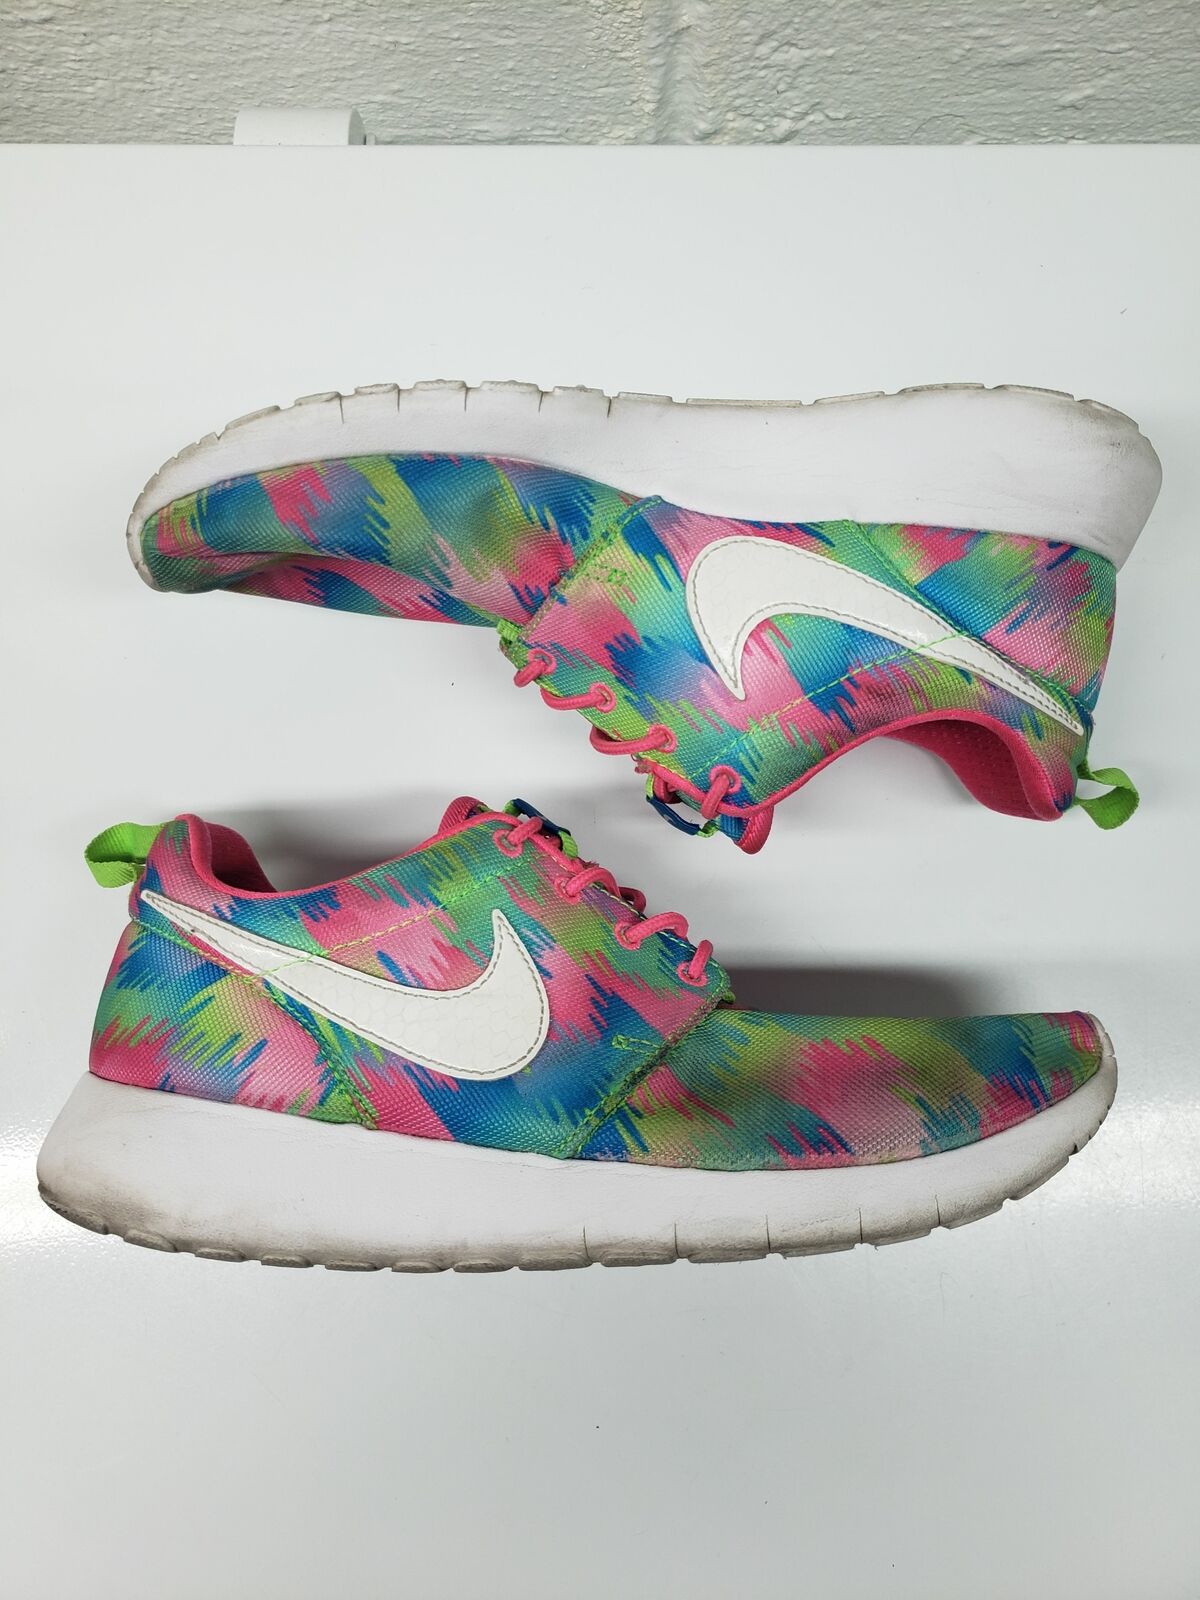 Iedereen uitzondering Rond en rond Nike Roshe One Print GS Girls Lace Up Multicolor Running Shoes Size 6  677784-607 | eBay